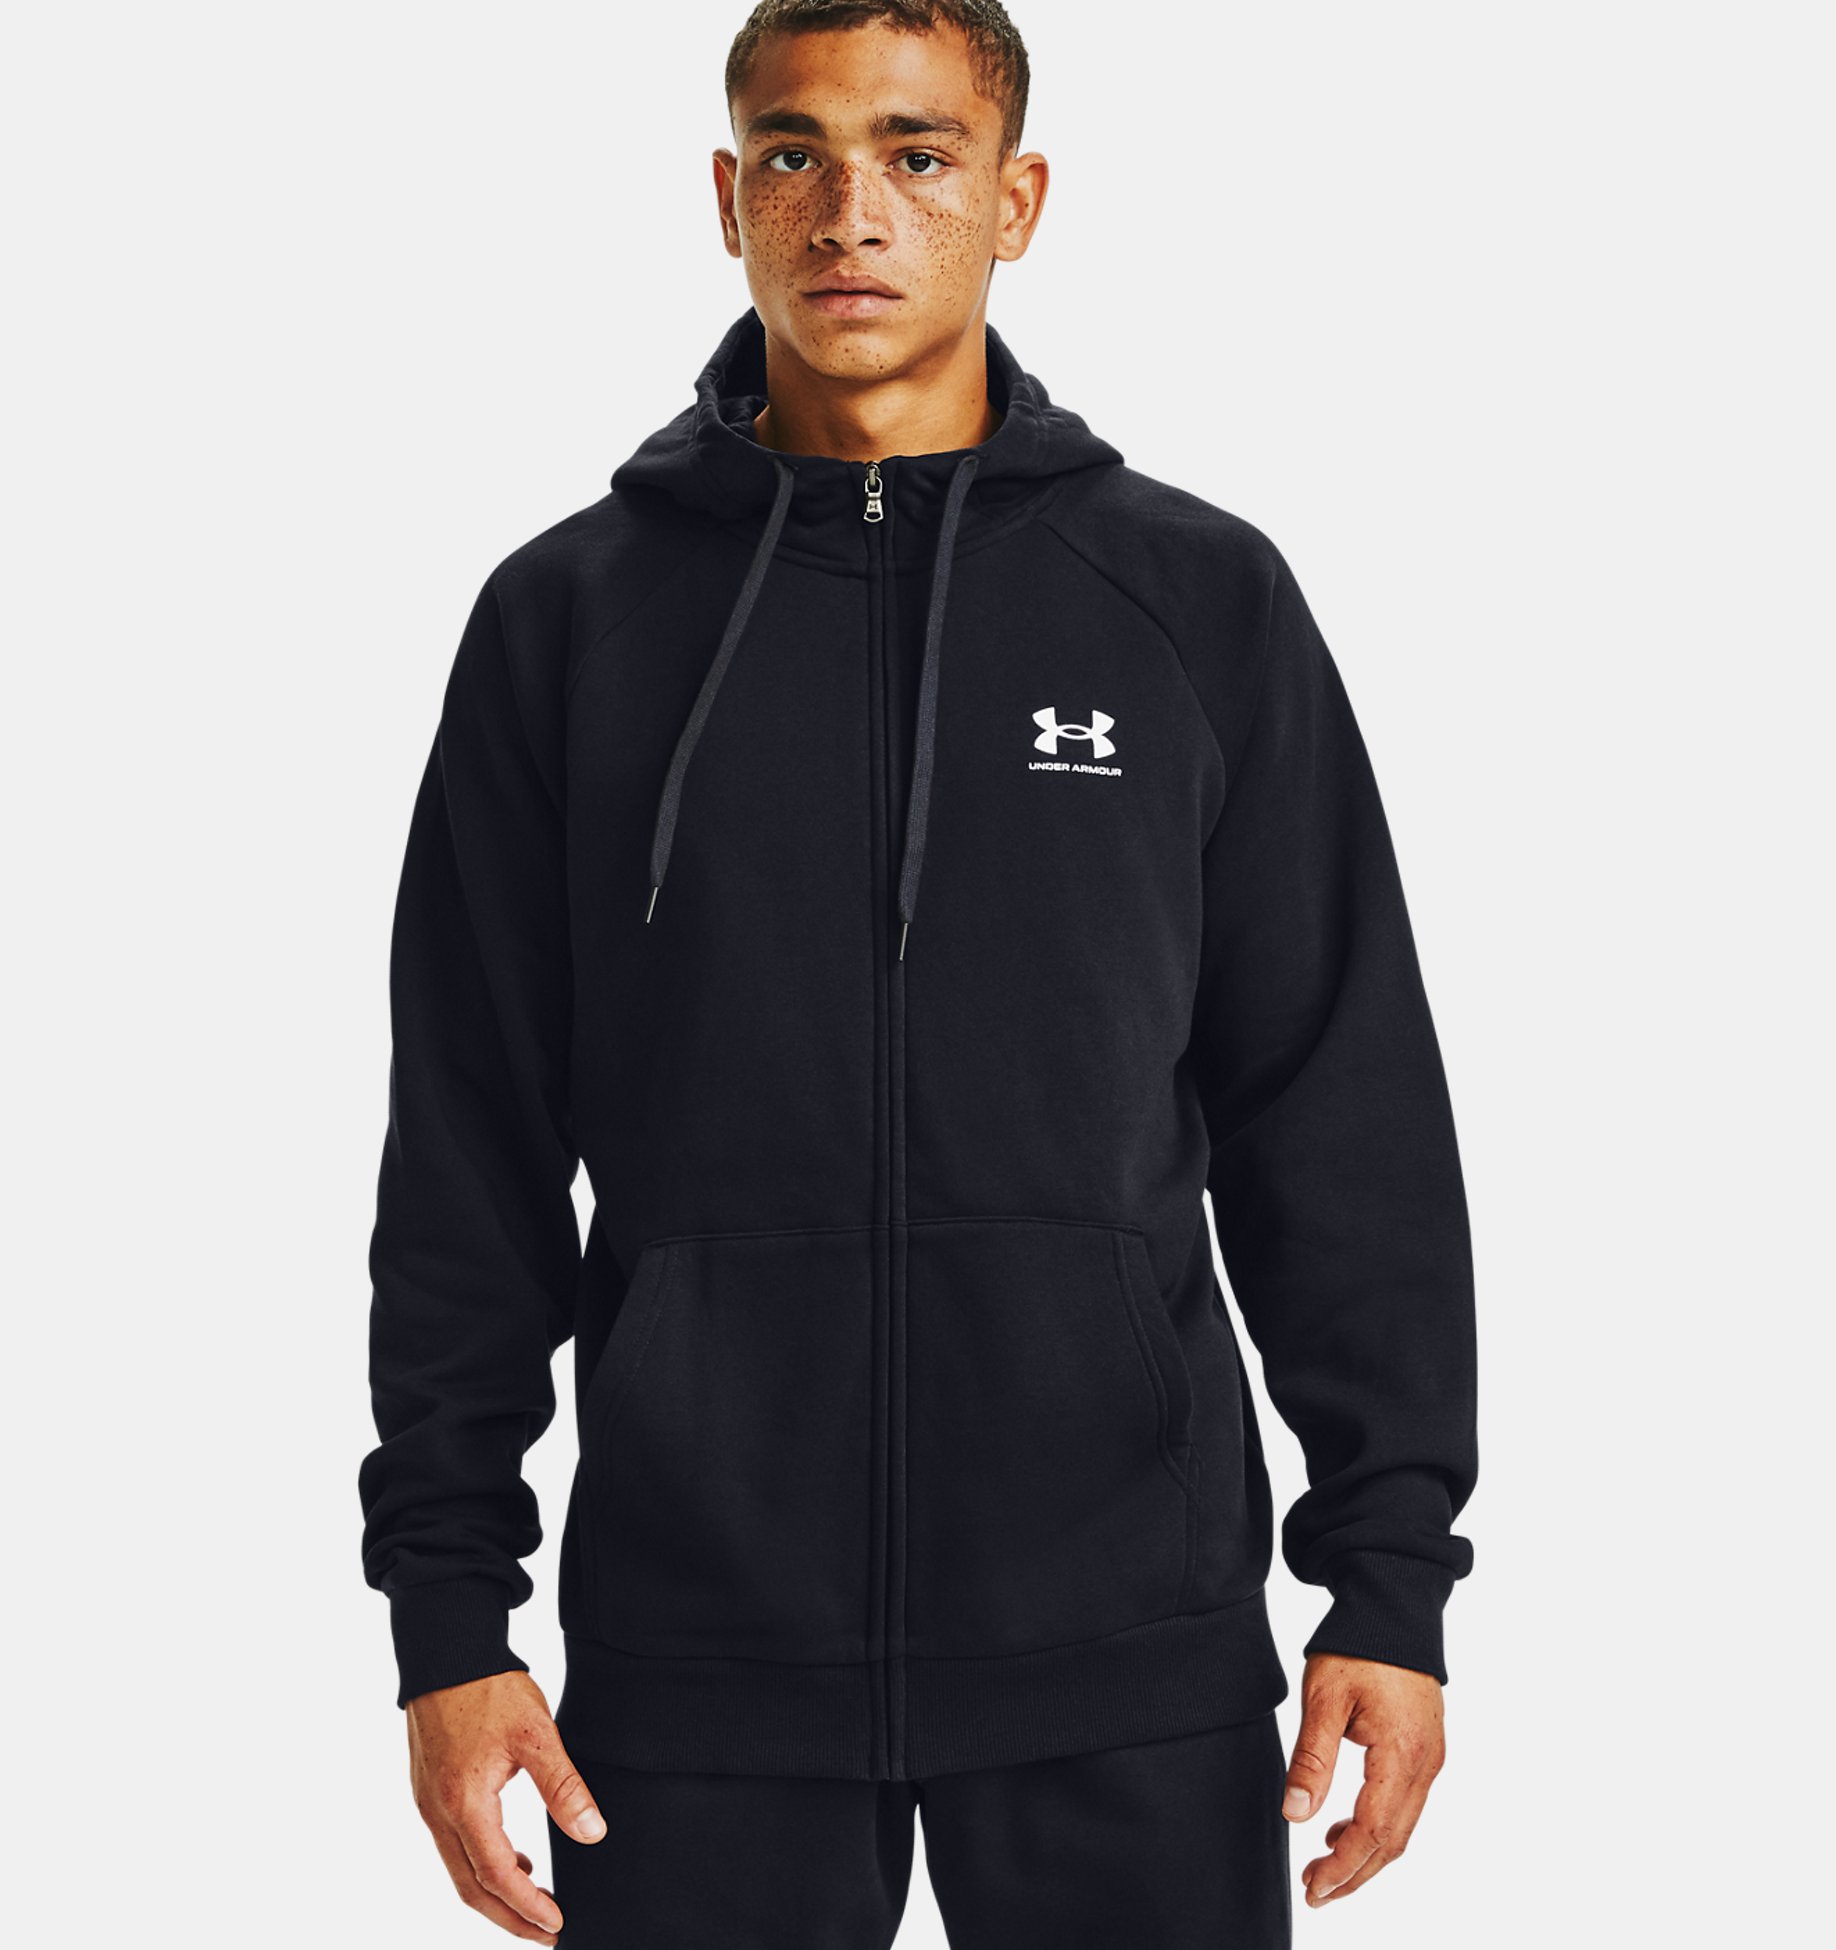 Under Armour: Up to 50% off + an extra 30% off Select Styles